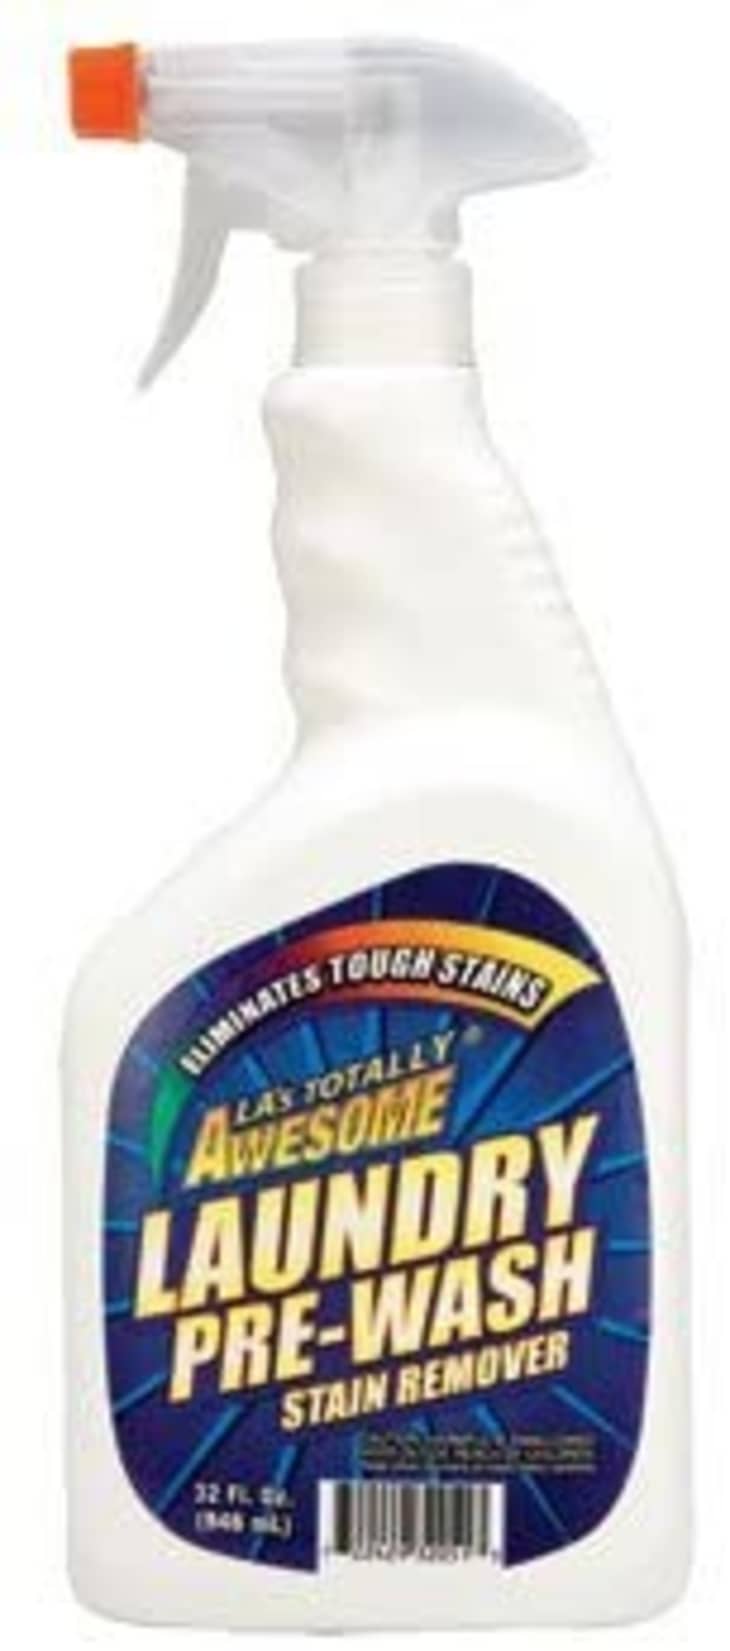 Product Image: L.A.'s Totally Awesome Pre-Wash Stain Remover